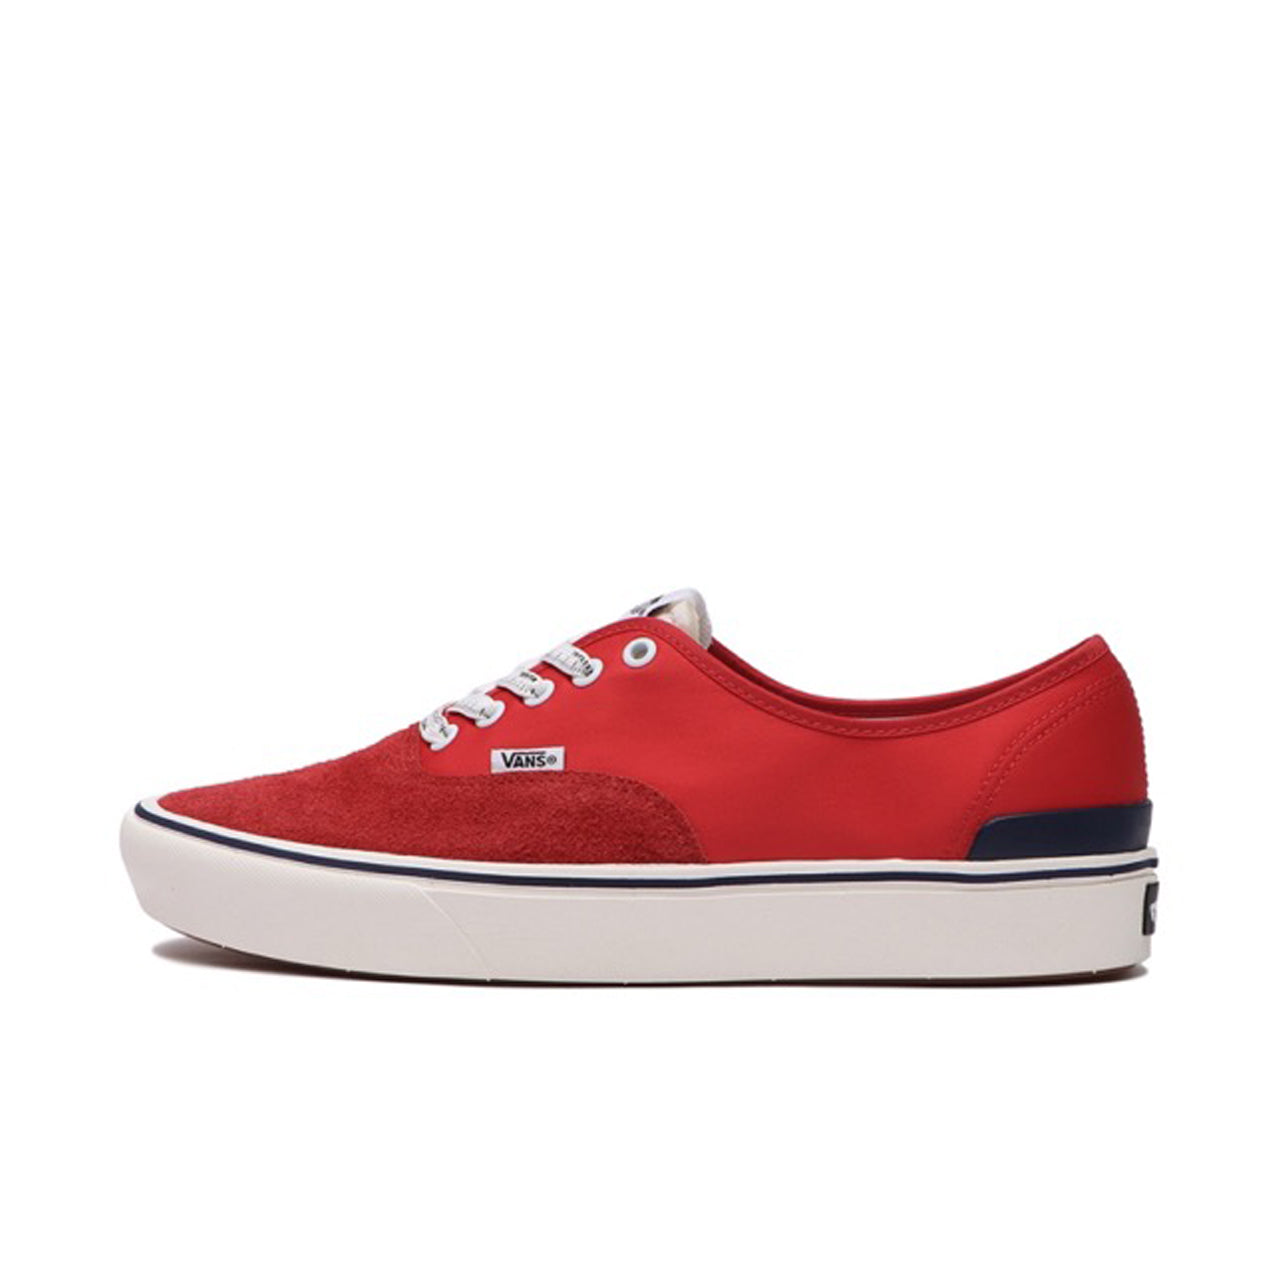 VANS TRIPSTER COMFYCUSH AUTHENTIC us10neighbo